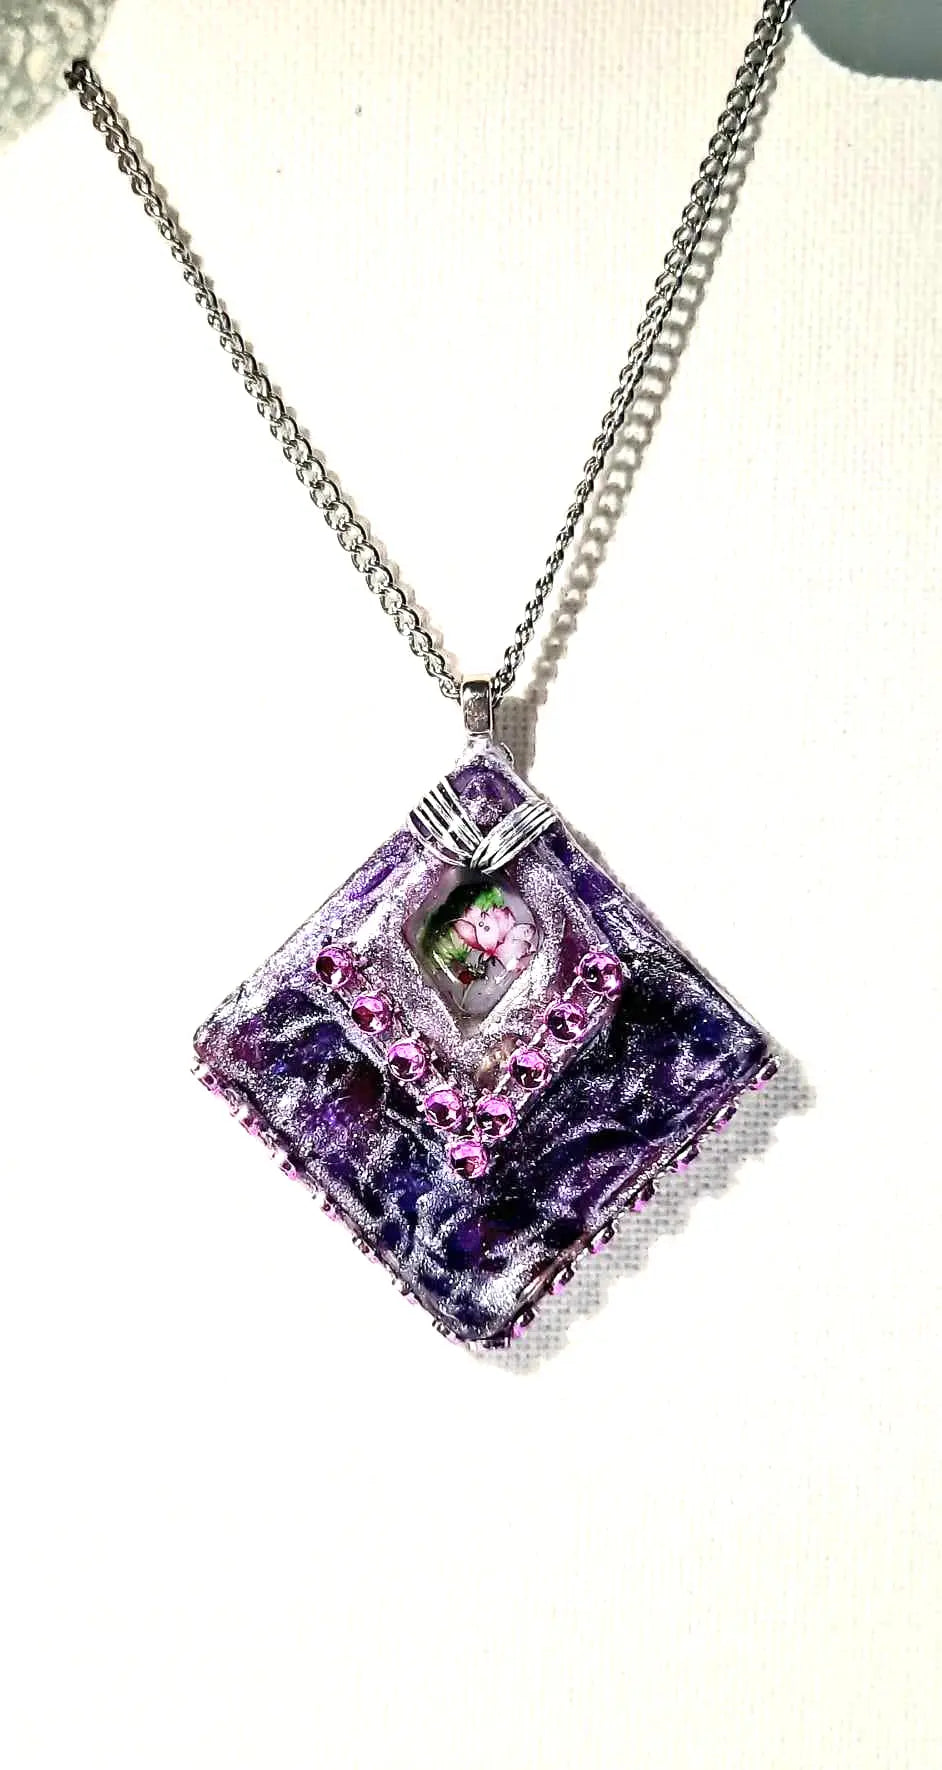 Resined purple flower pink Necklace pendant by Josie - Image #1